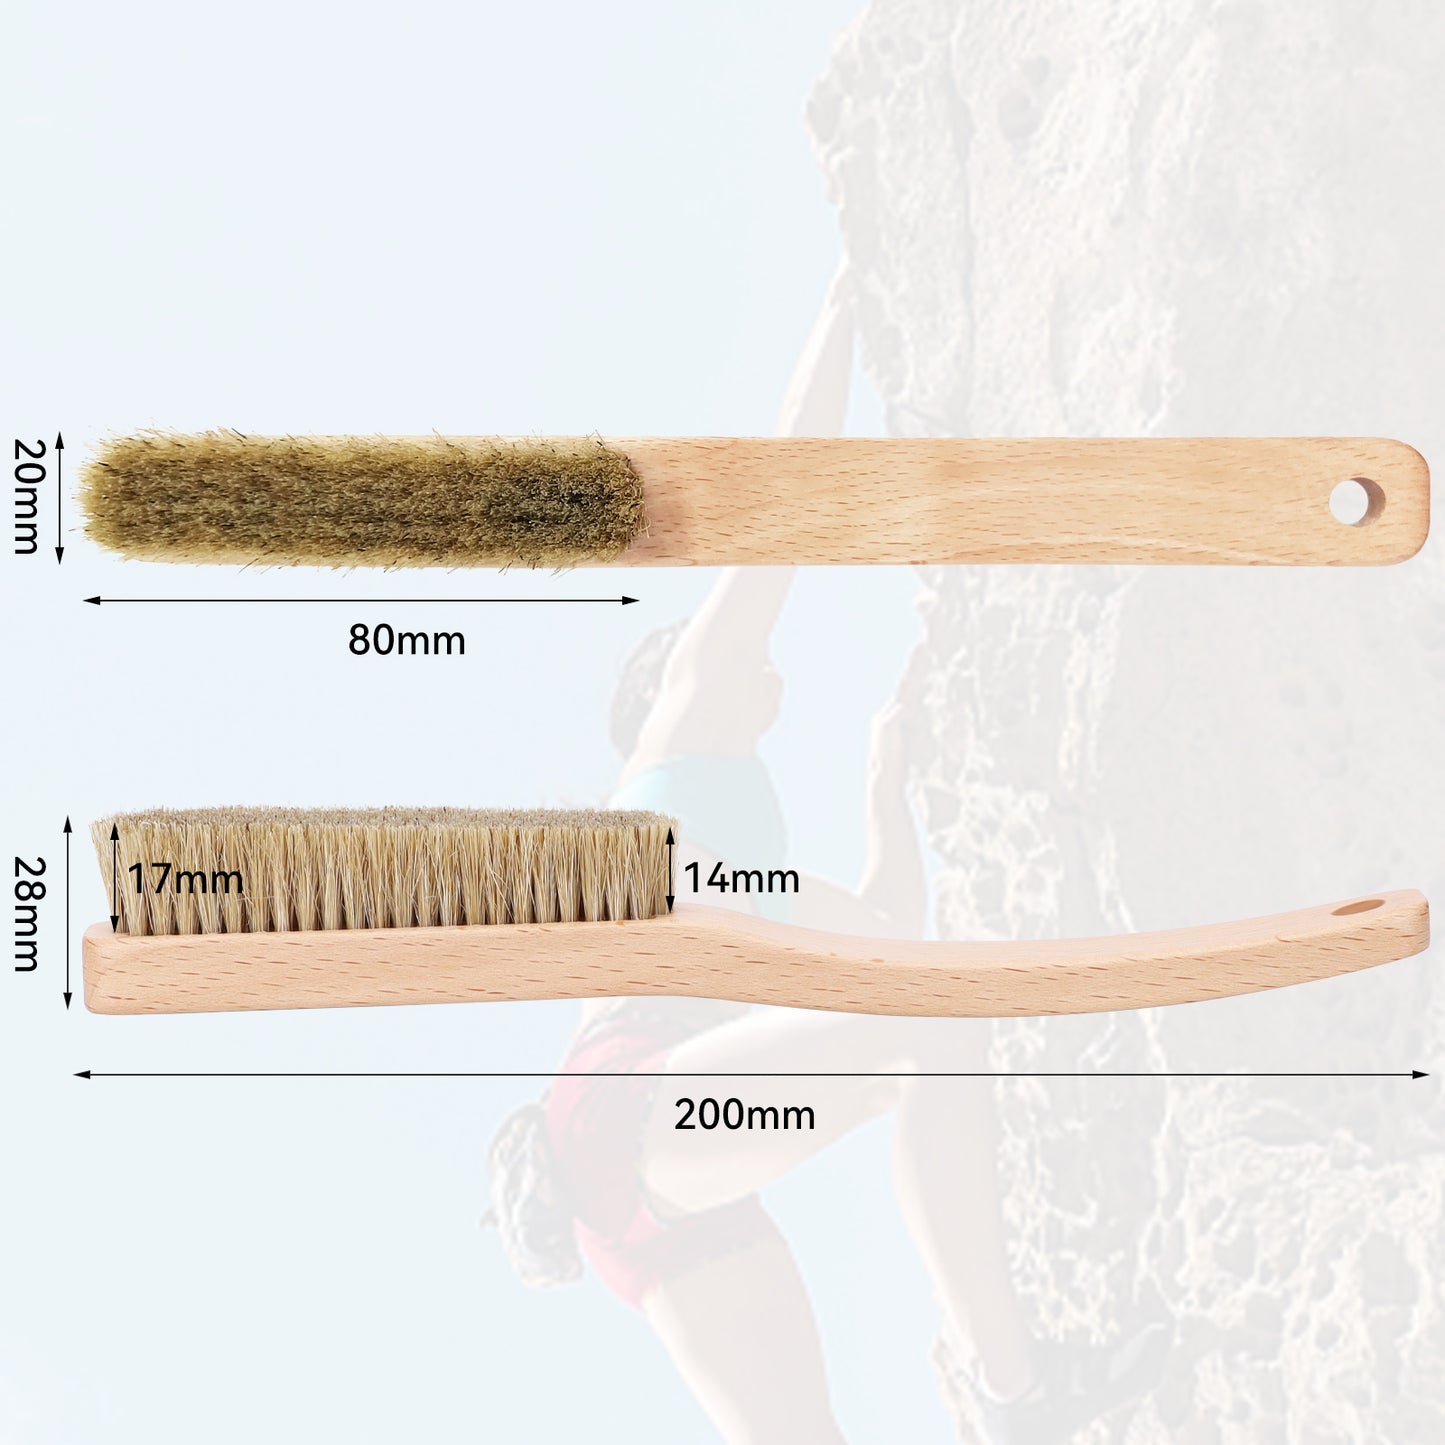 Premium Rock Climbing Brush with Thick Ultra Durable Boar's Hair Bristles, Bouldering Brush with Strong Handle, Uni-Sex Boulder Brushes as Rock Climbing Gift (CJ-CB2010A-B-TS)